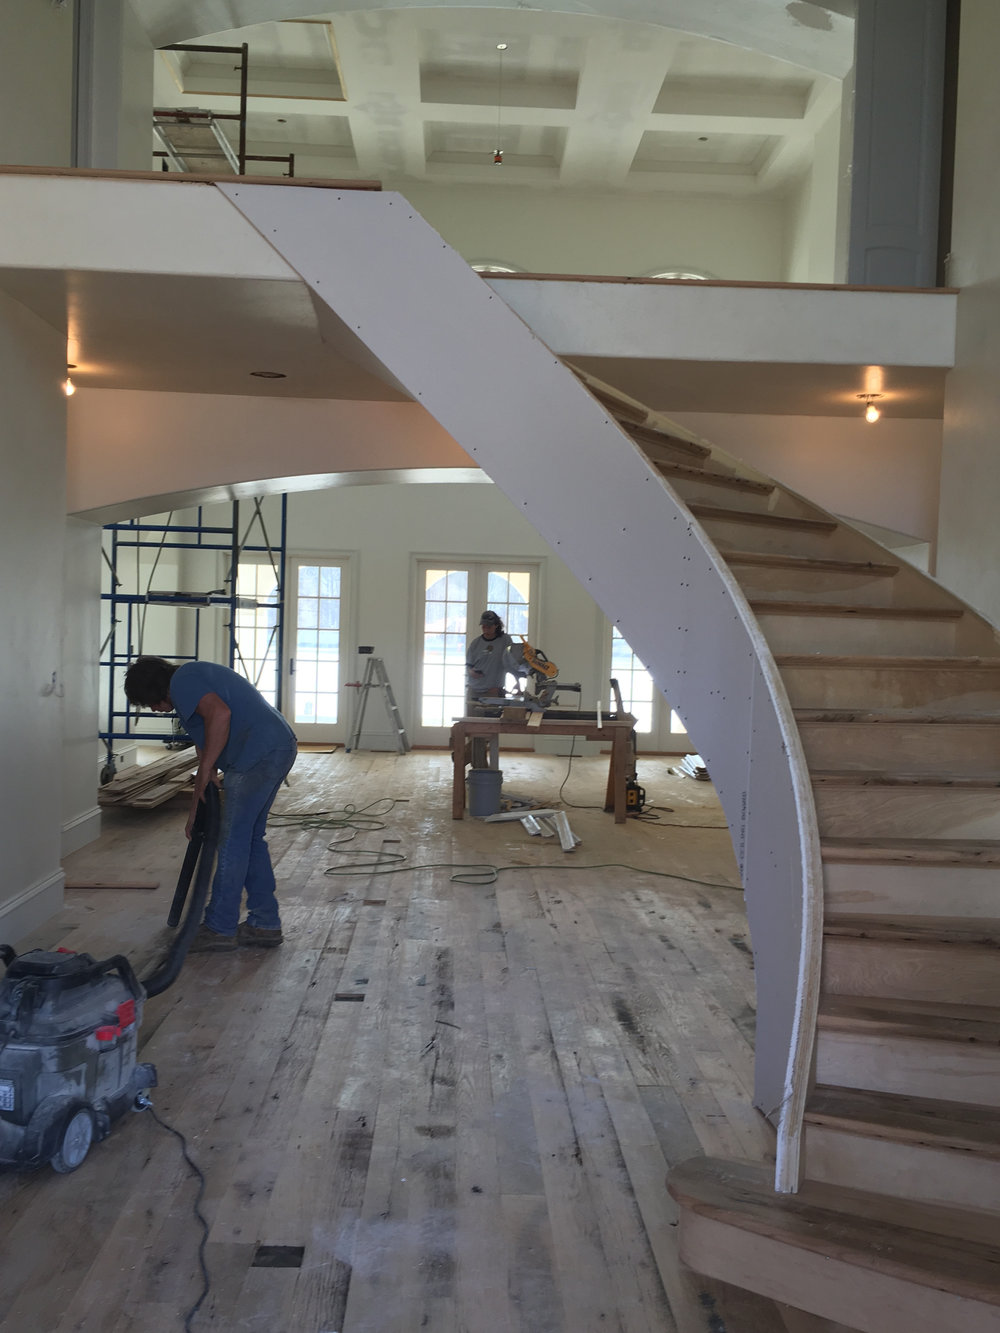  Foyer during construction 